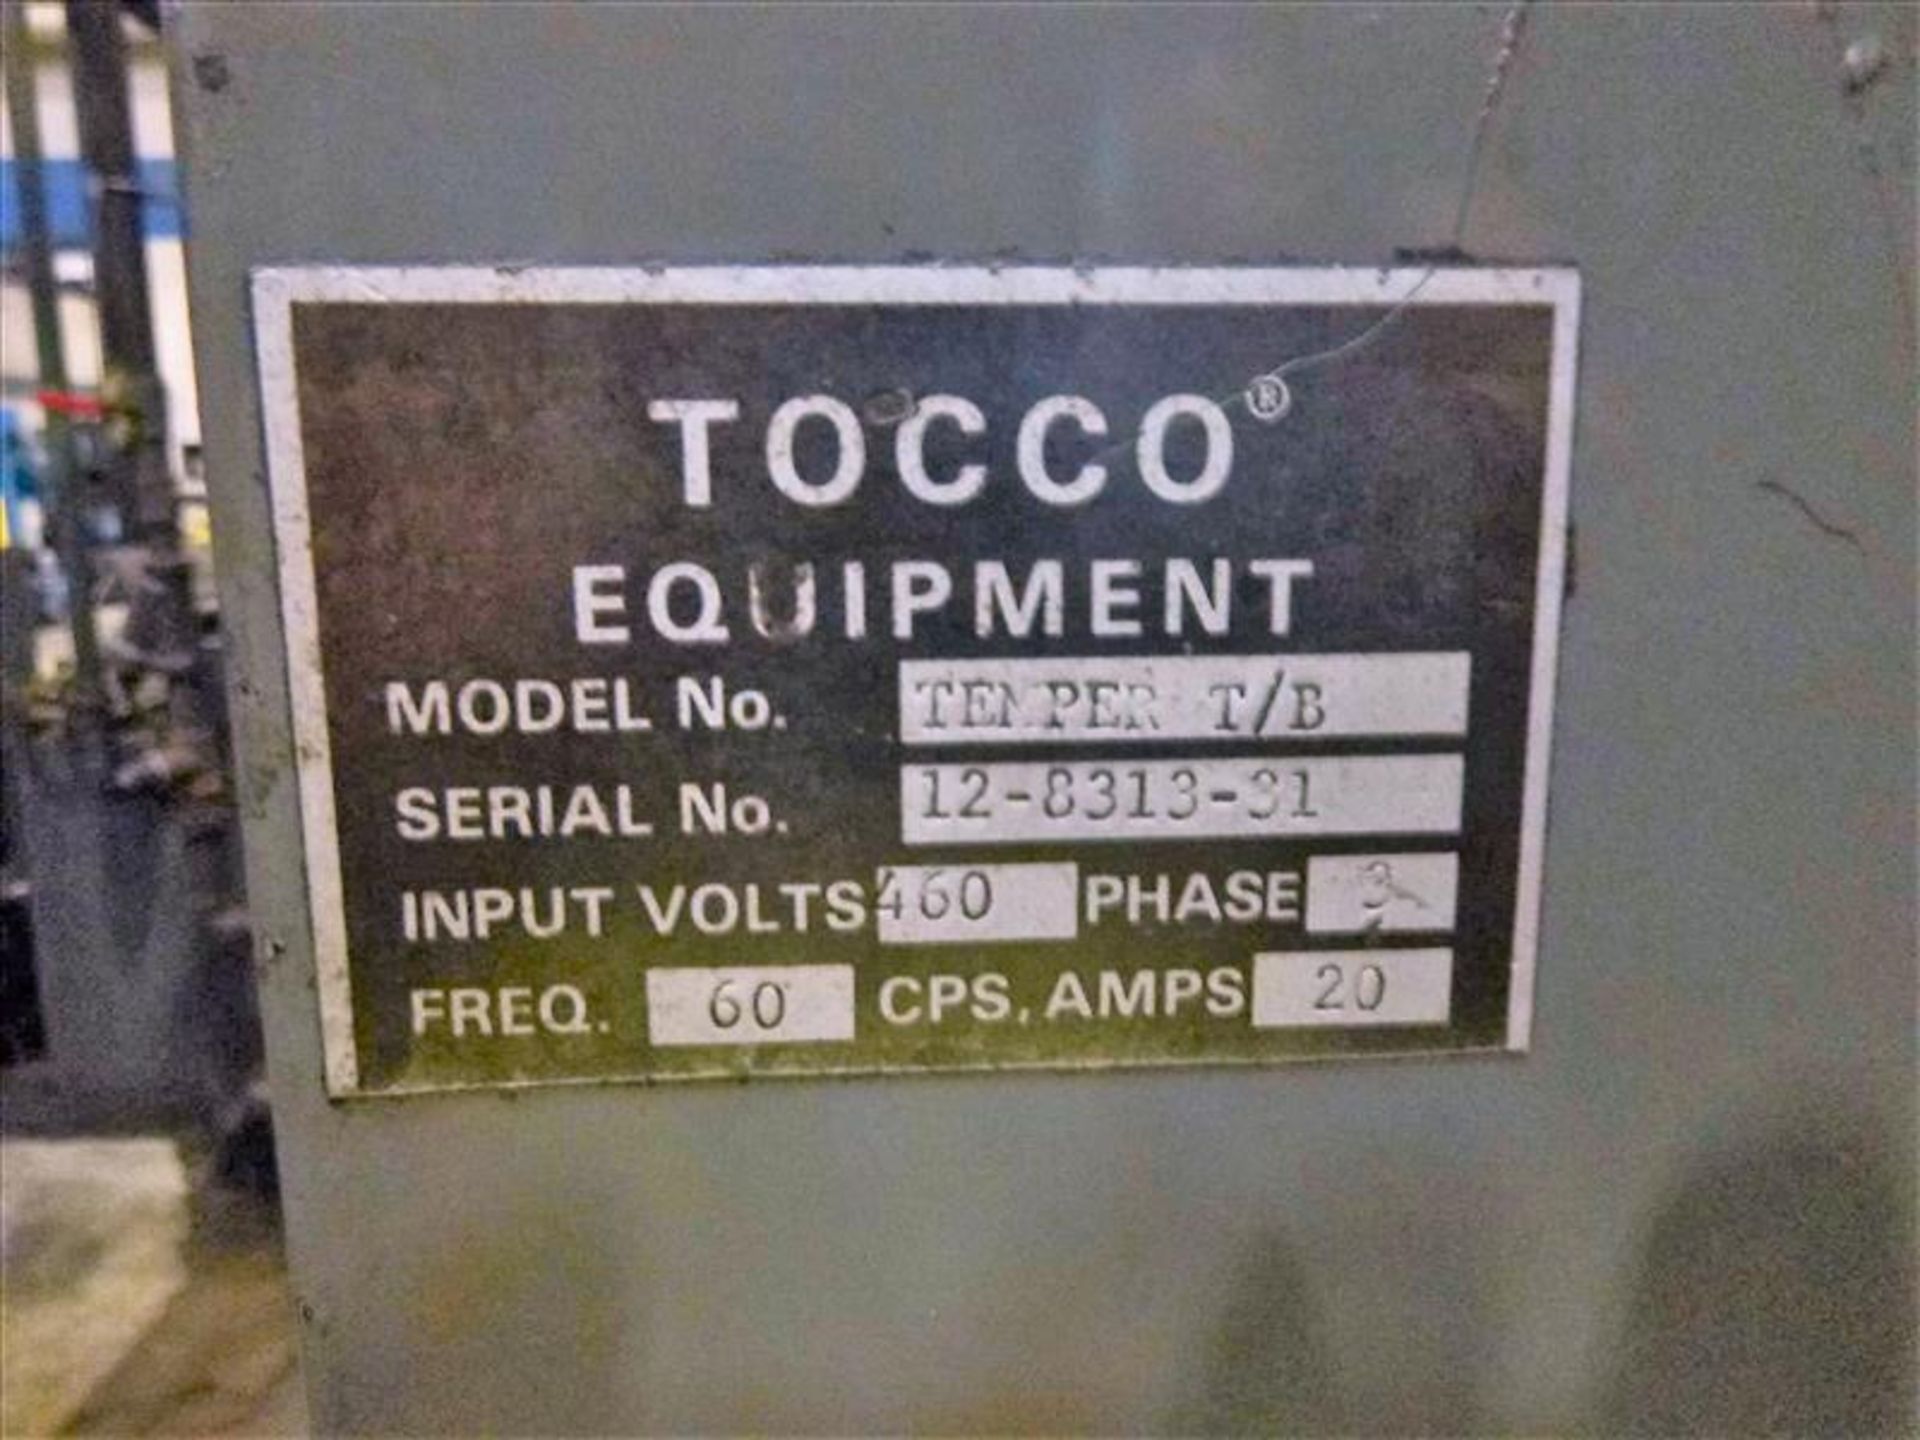 TOCCO Tempering Unit w/ INDUCTRON 100-3T-02 100 kw, s/n 12-8313-11 c/w Distilled Water Cooling/ - Image 16 of 20